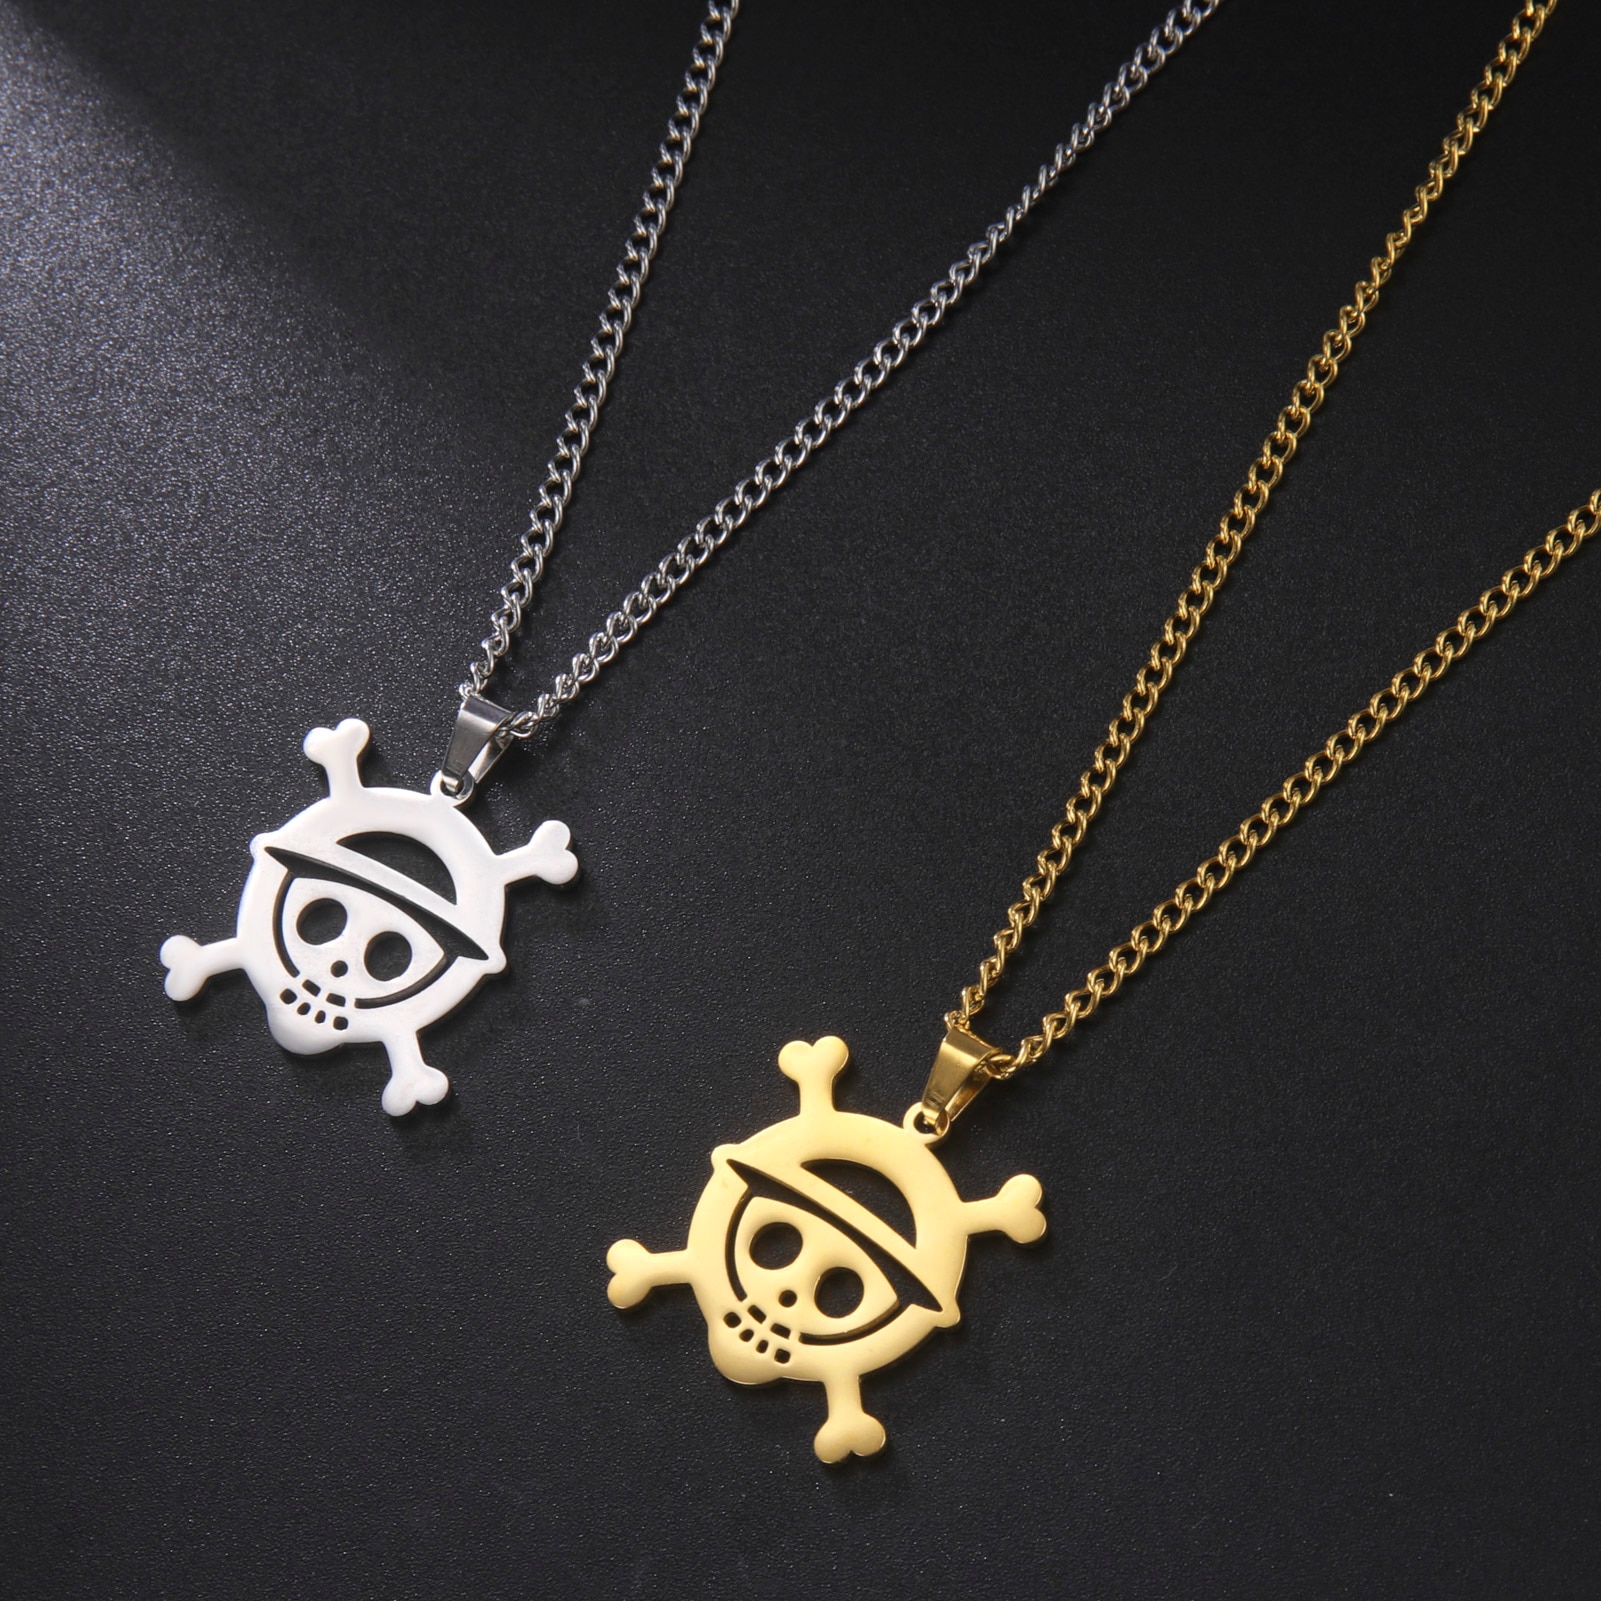 One Piece – Pirate Skeleton Themed Necklaces (2 Designs) Pendants & Necklaces